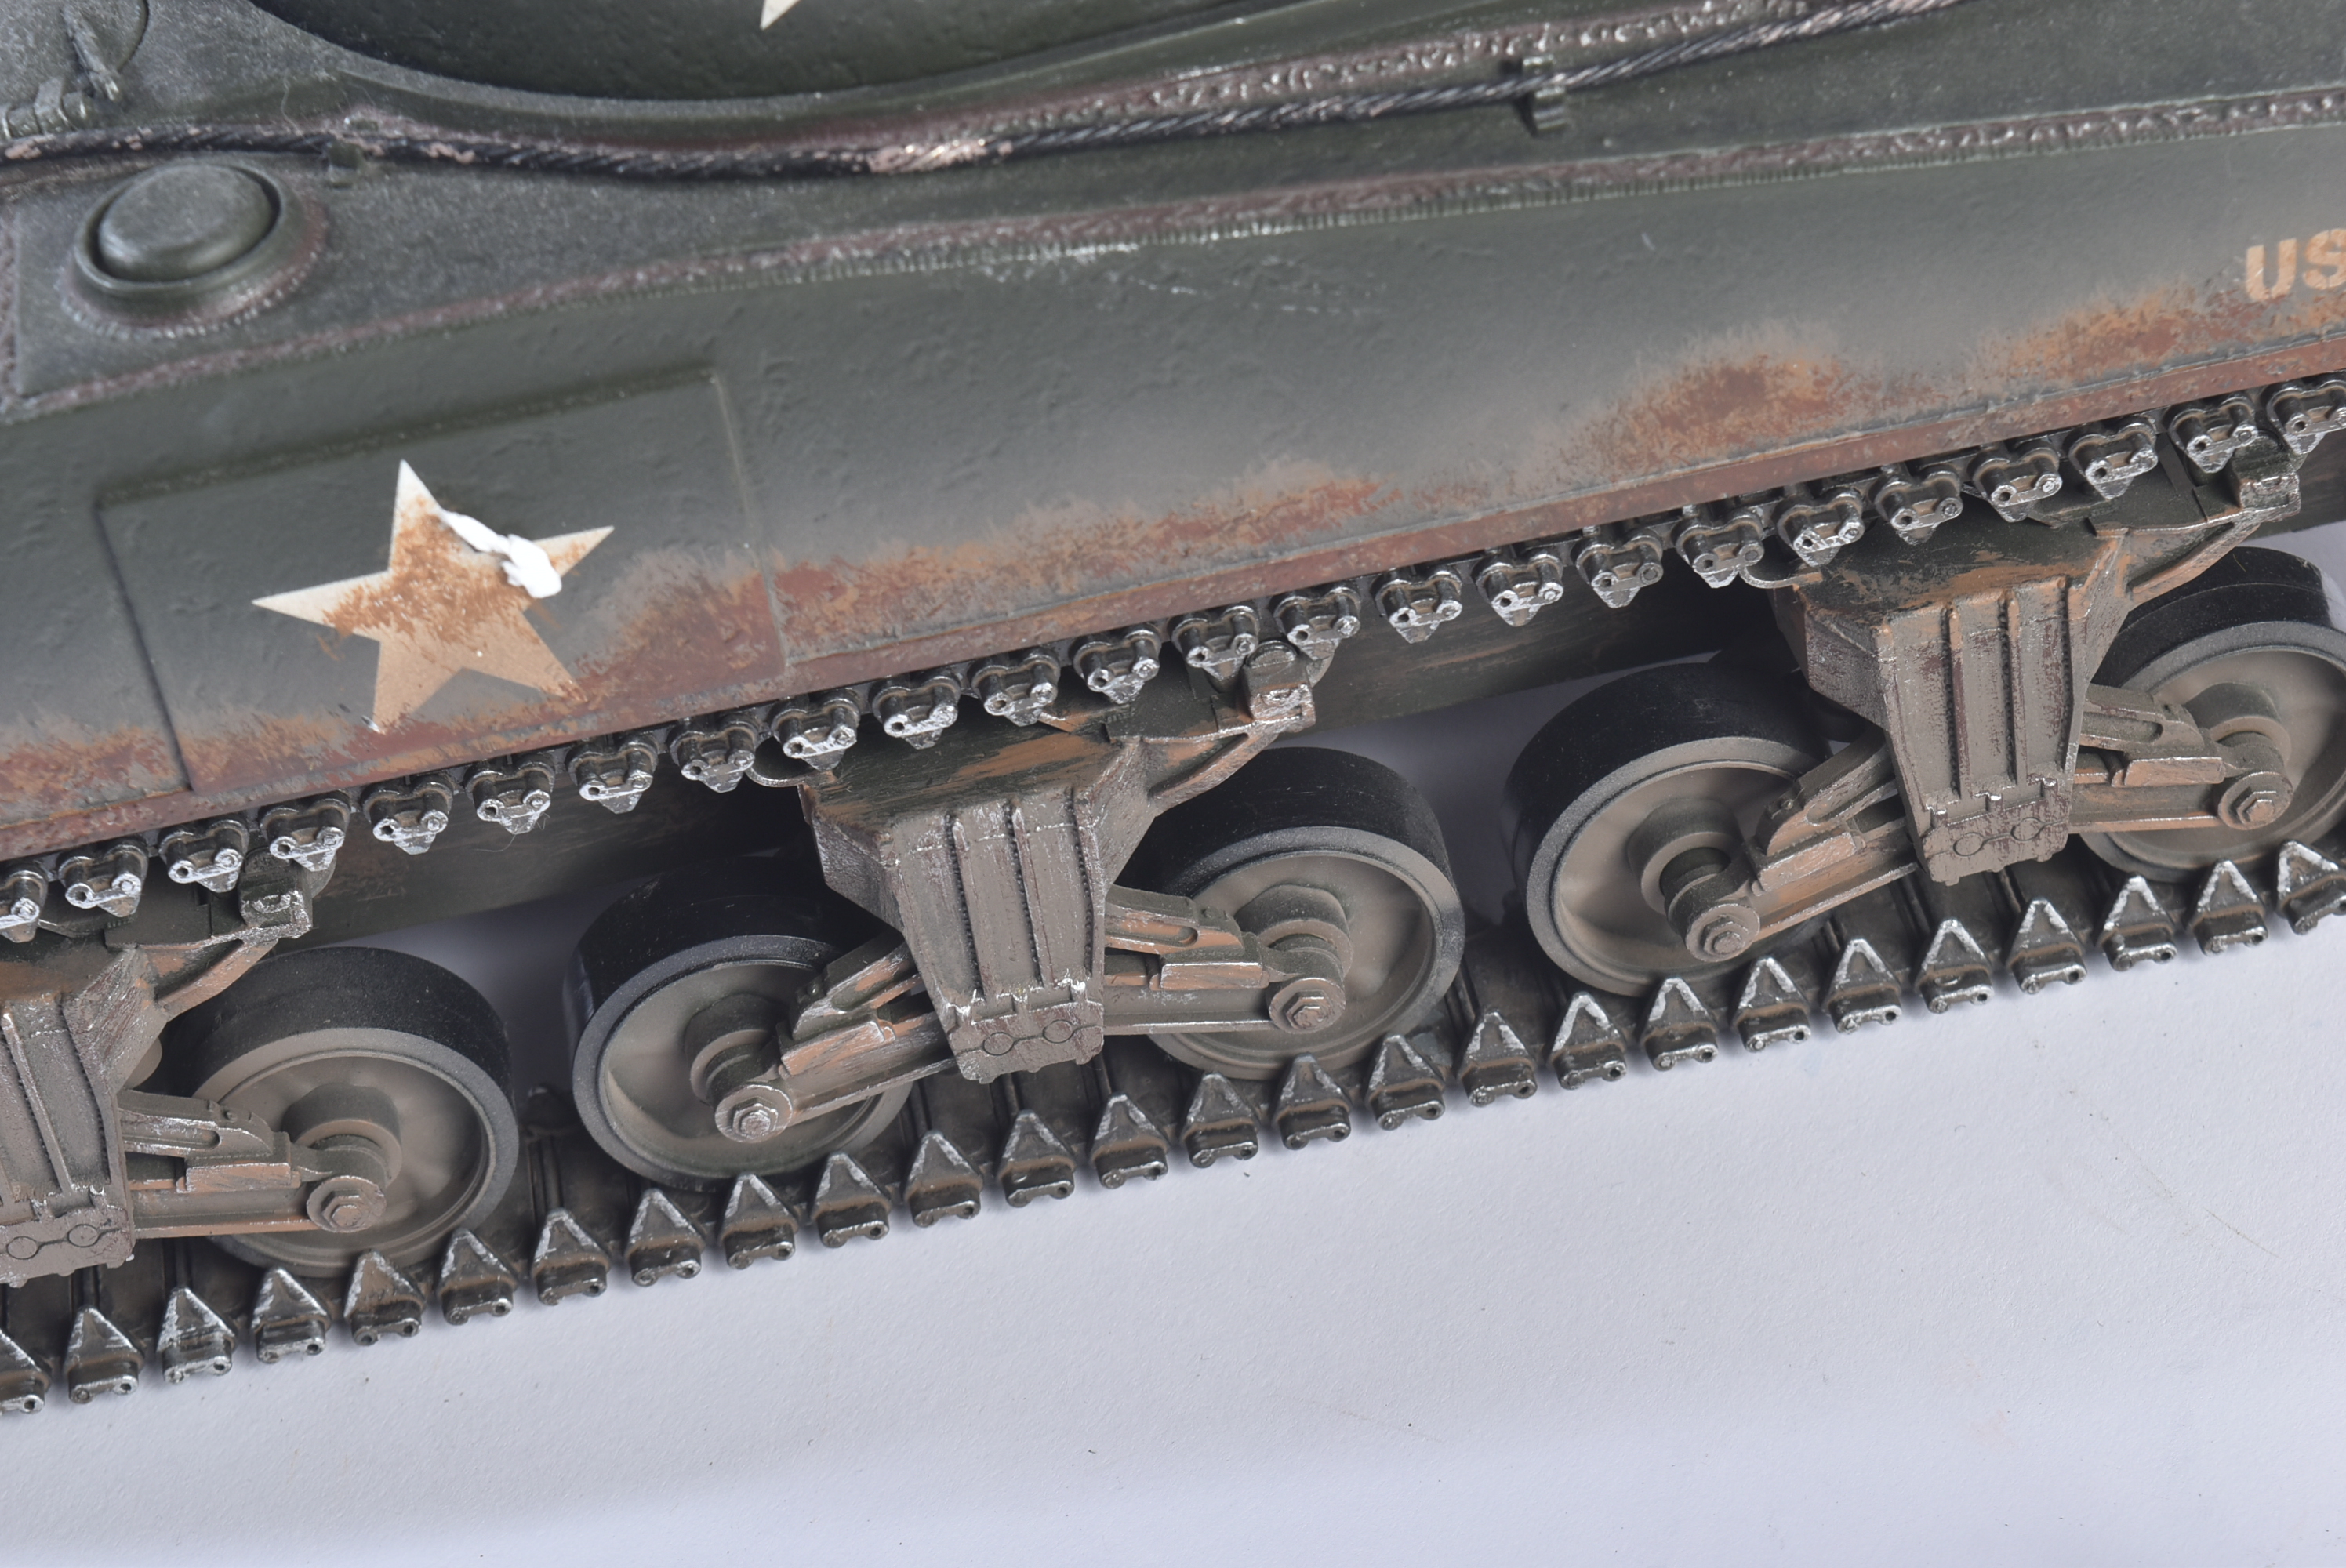 UNIMAX FORCES OF VALOUR 1/16 SCALE DIECAST M4A3 SHERMAN TANK MODEL - Image 8 of 13